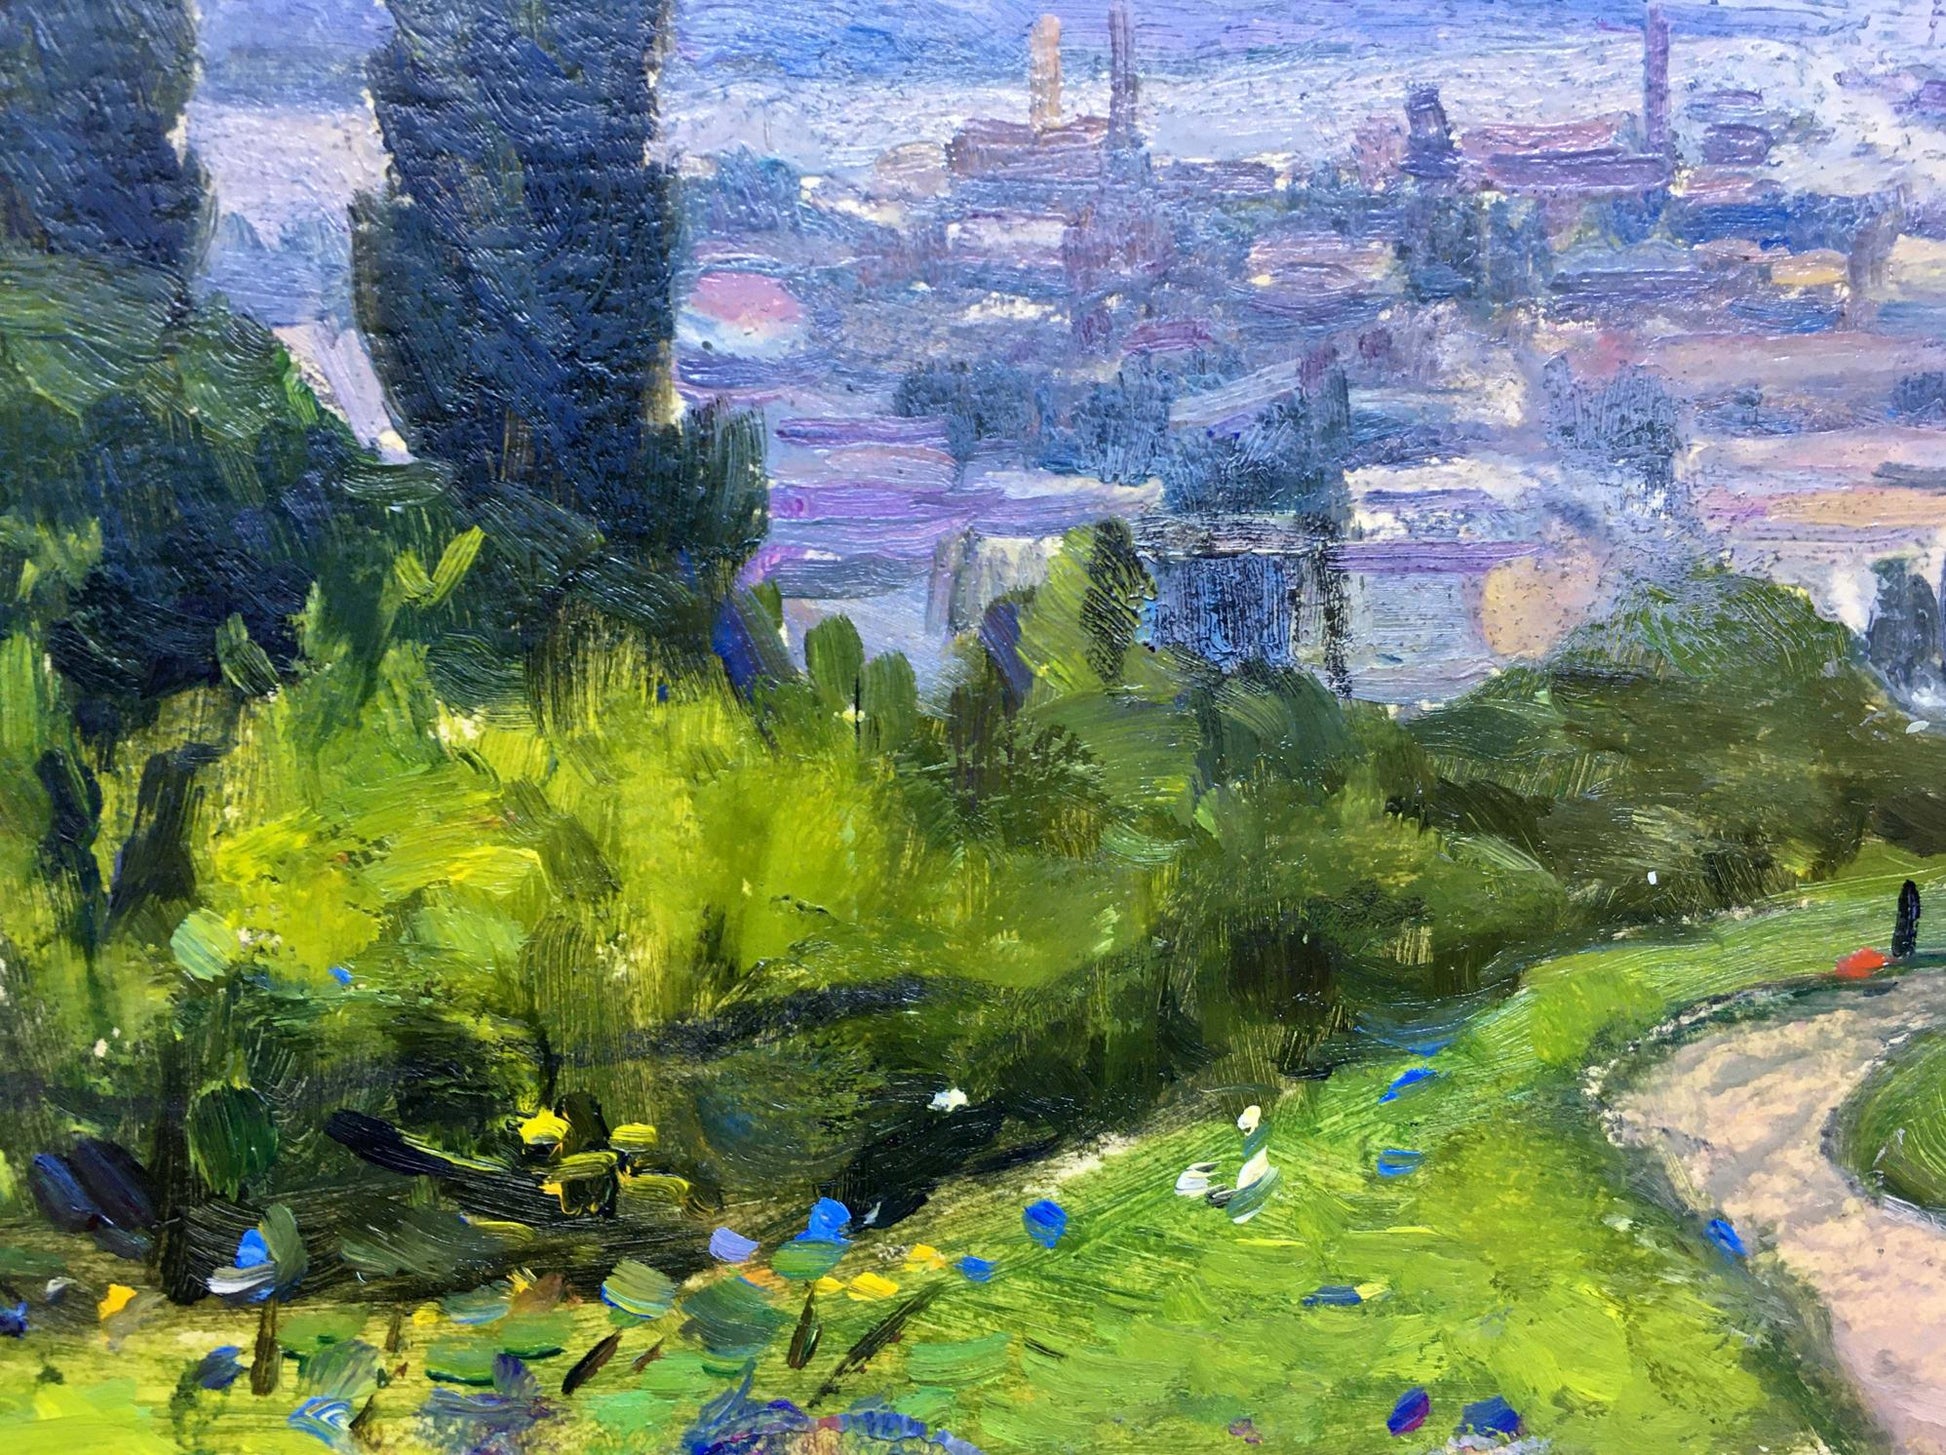 Through Popov I. A.'s oil painting, one can glimpse the serene beauty of Pechersky Park